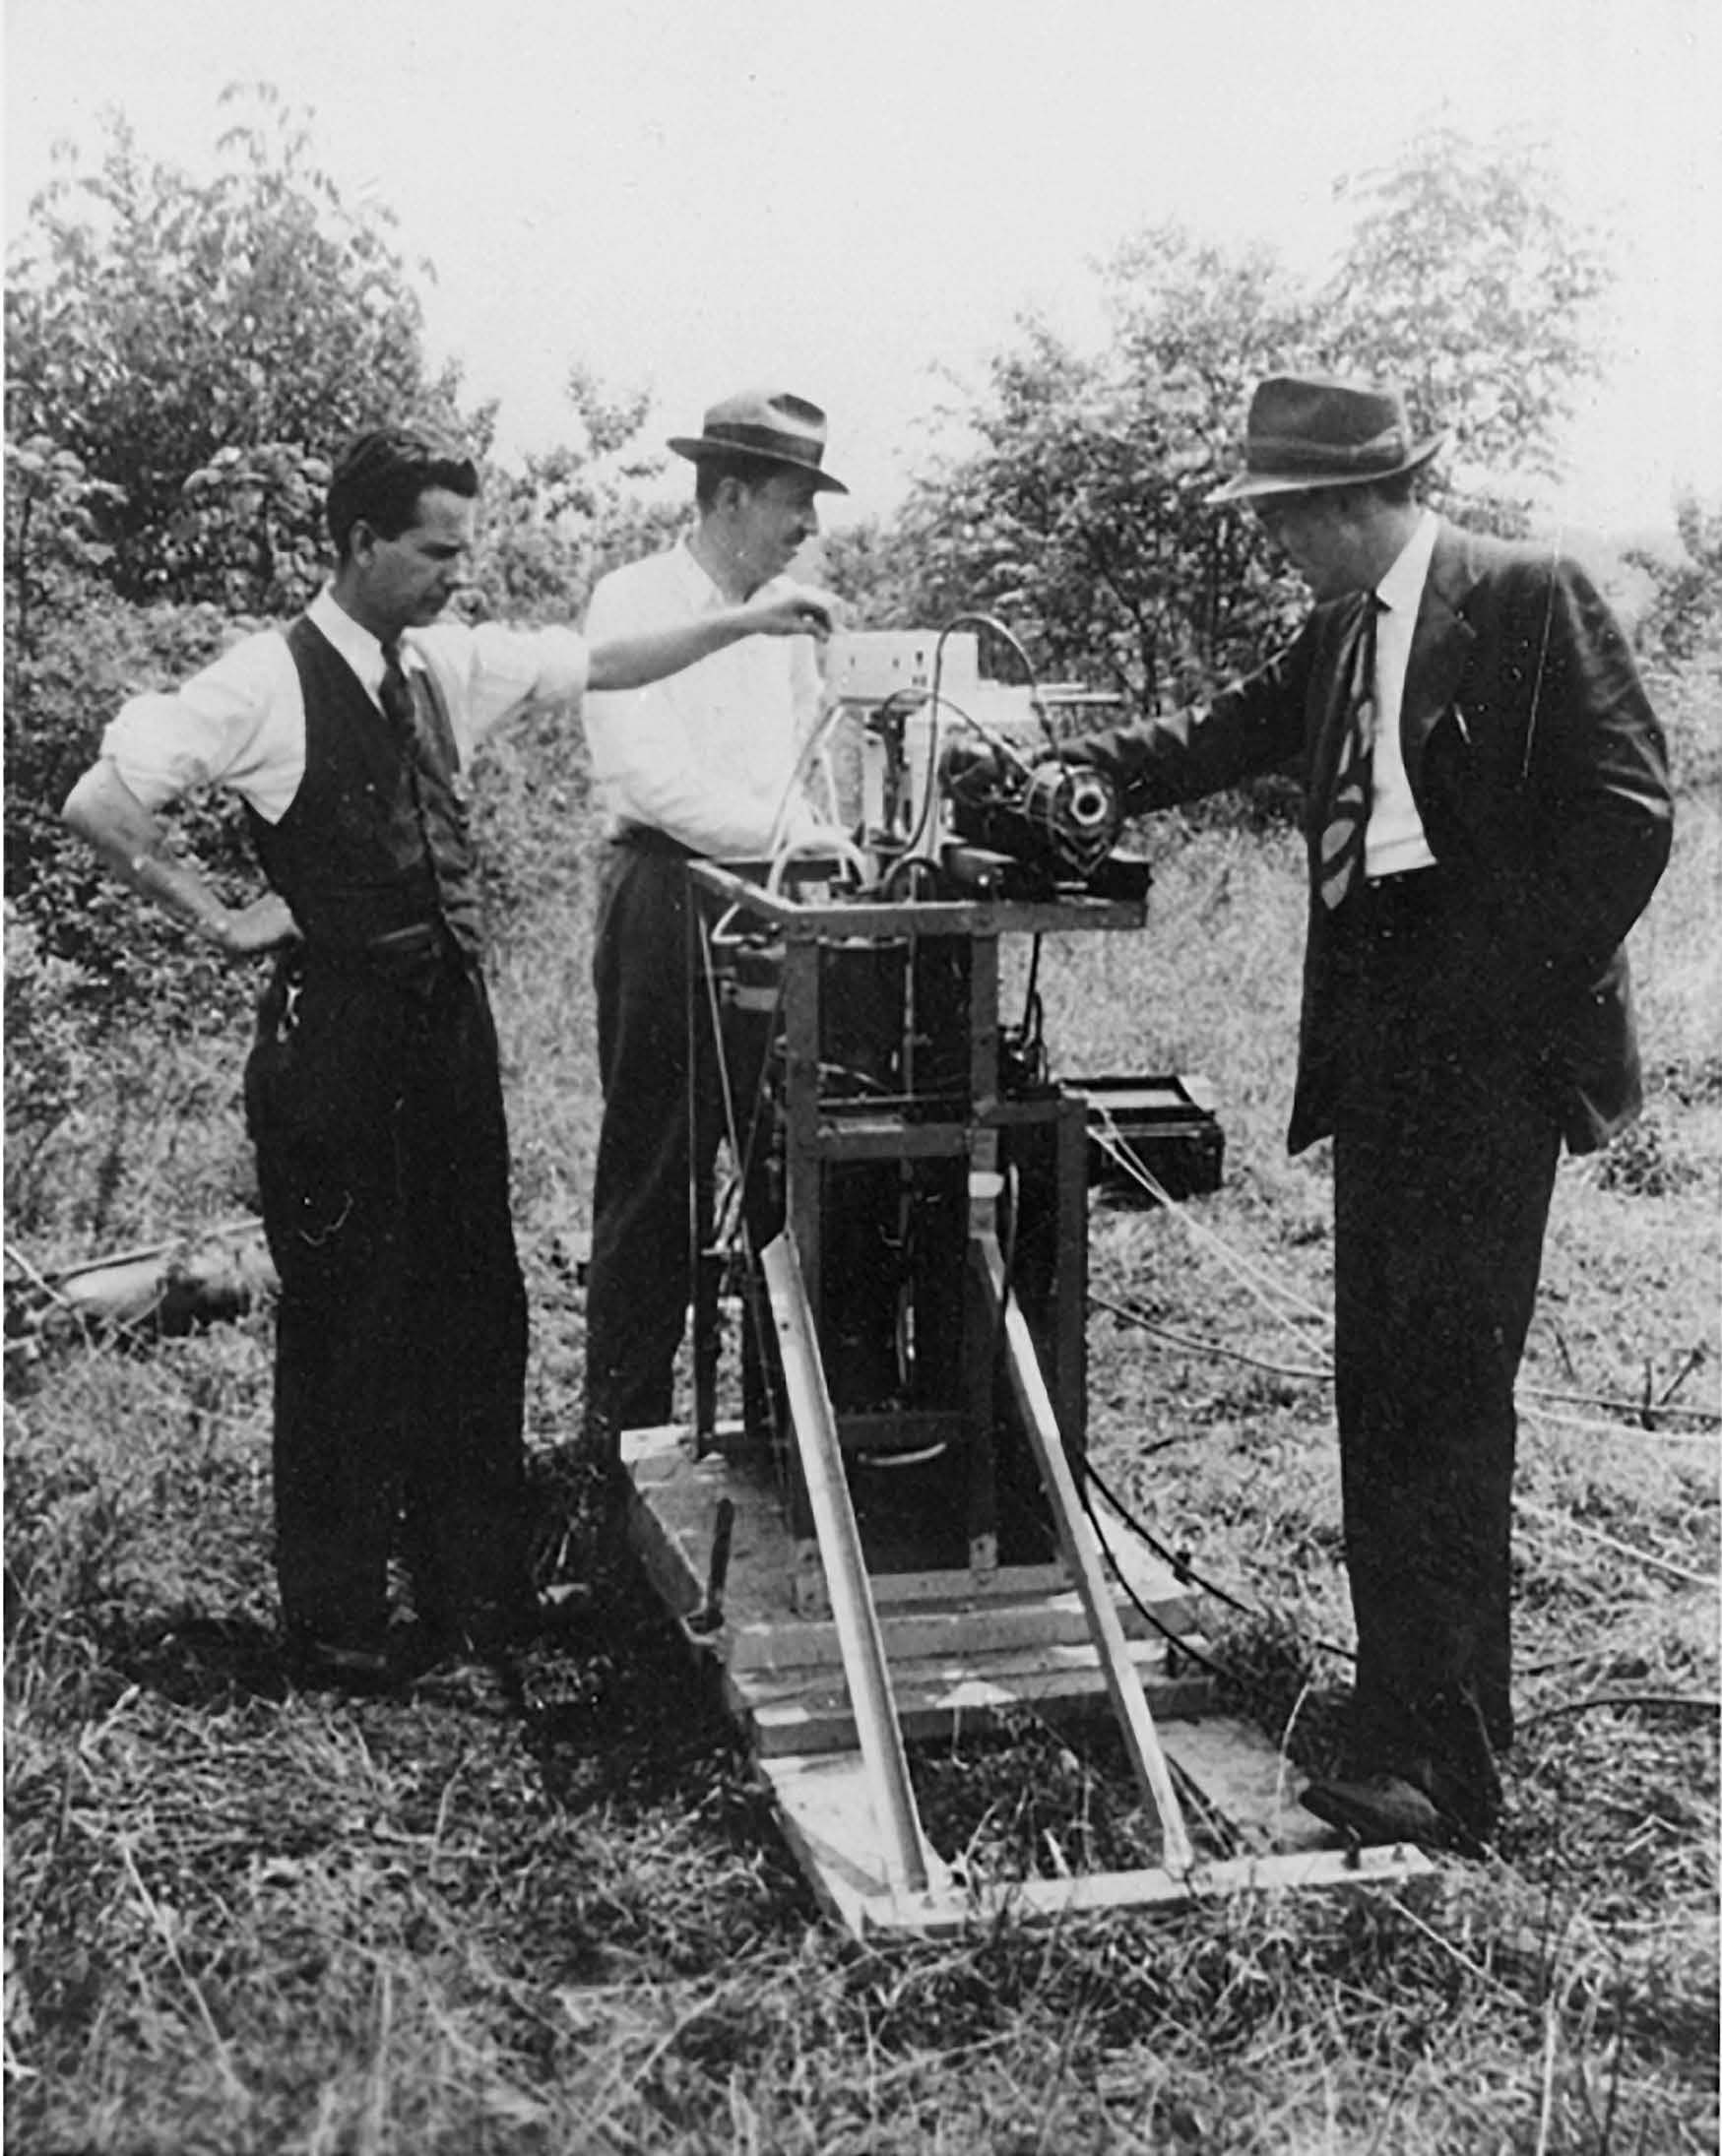 The American Rocket Society tested the M15-G1 rocket engine in June 1942. From left: Hugh Pierce, John Shesta and Lovell Lawrence, who would go on to become three of the founders of Reaction Motors Inc.